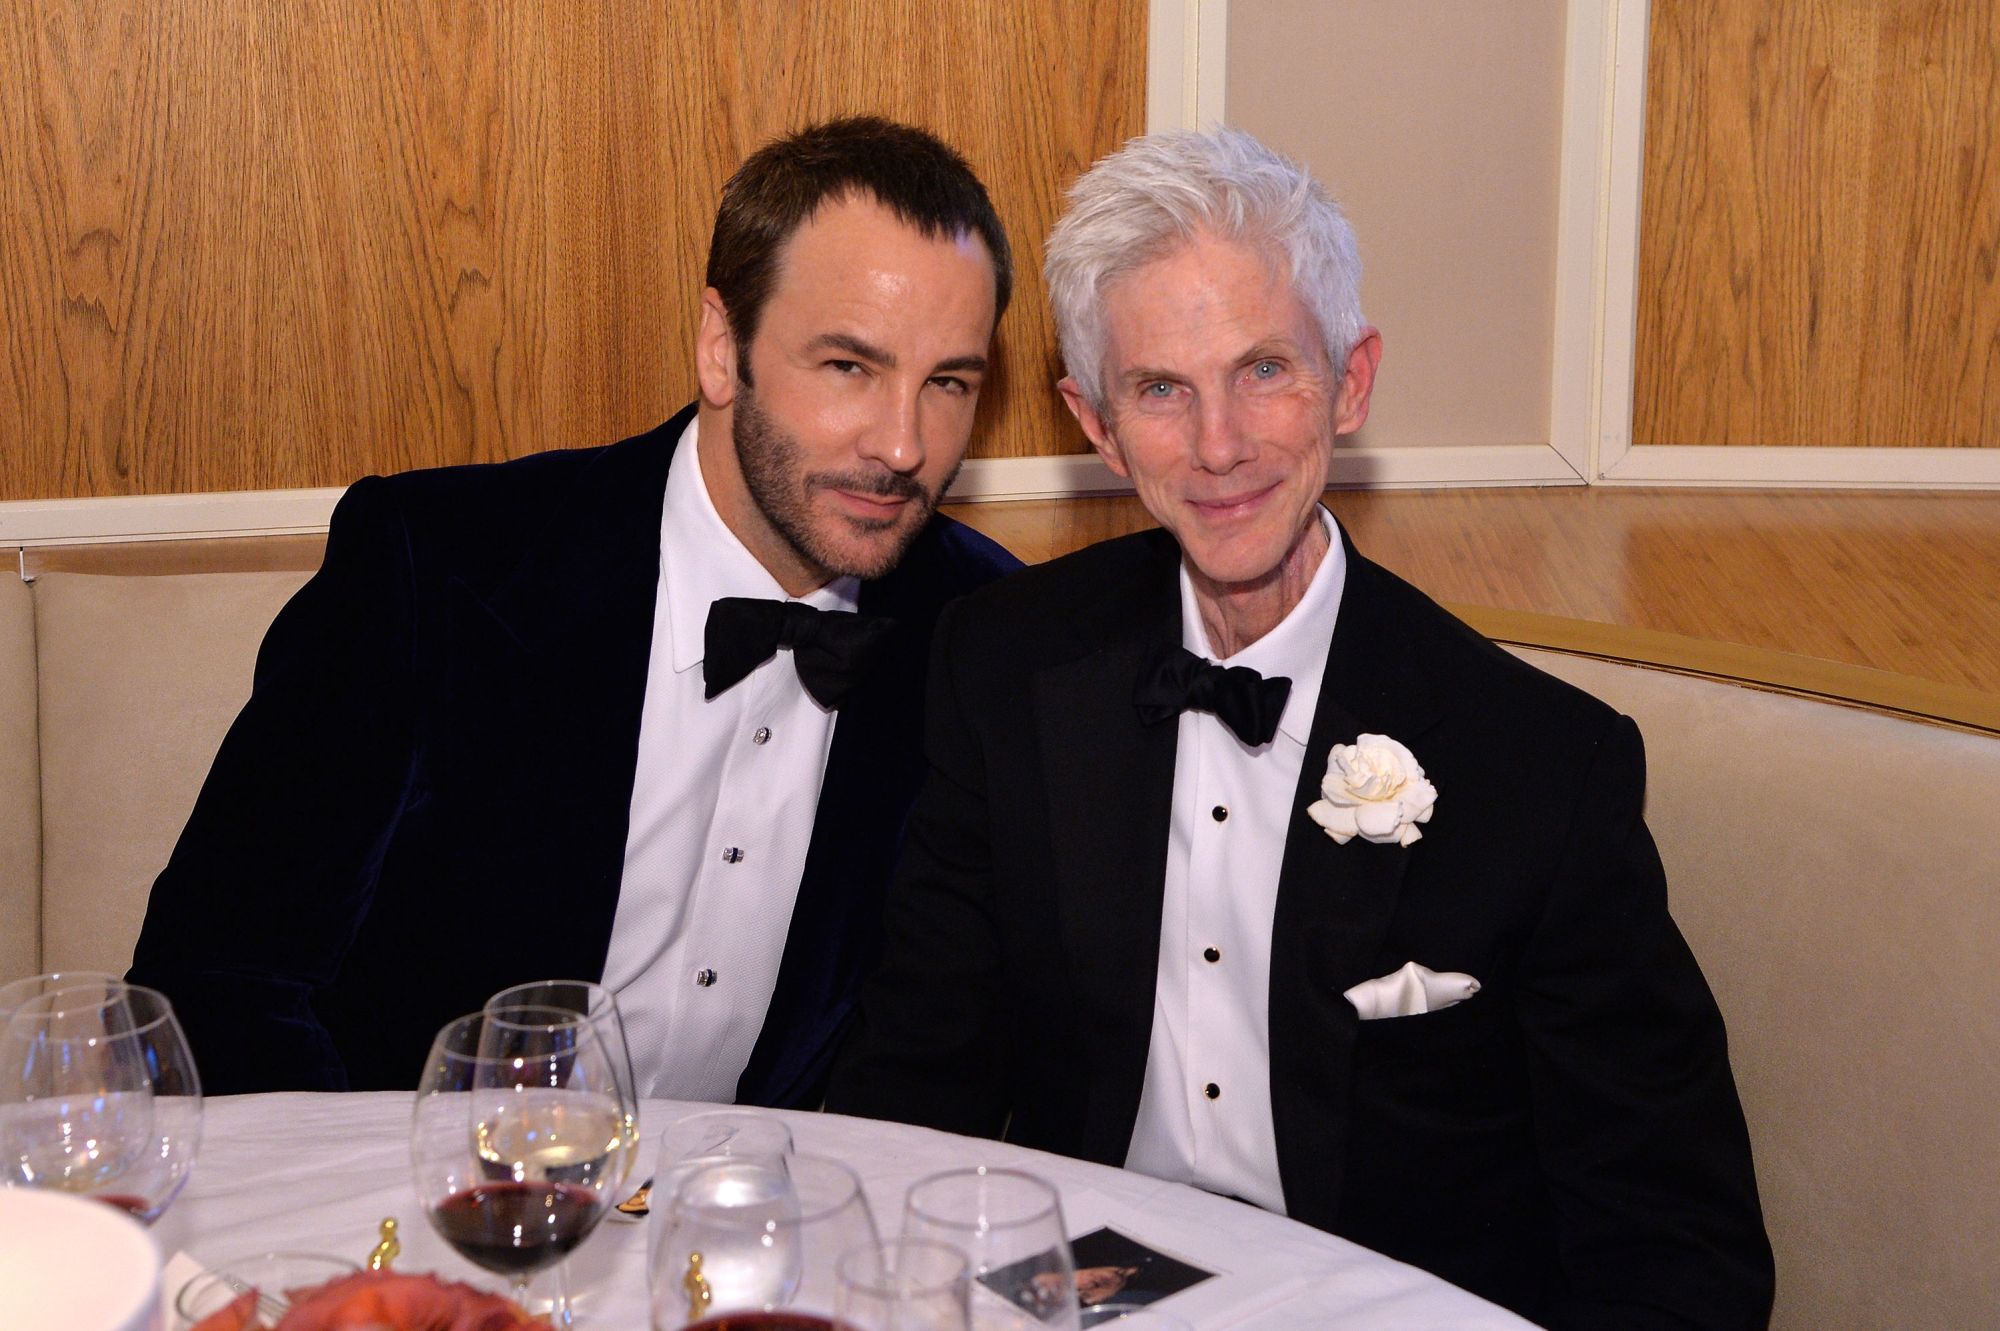 Richard Buckley, Fashion Editor and Tom Ford's Husband, Dies at 72